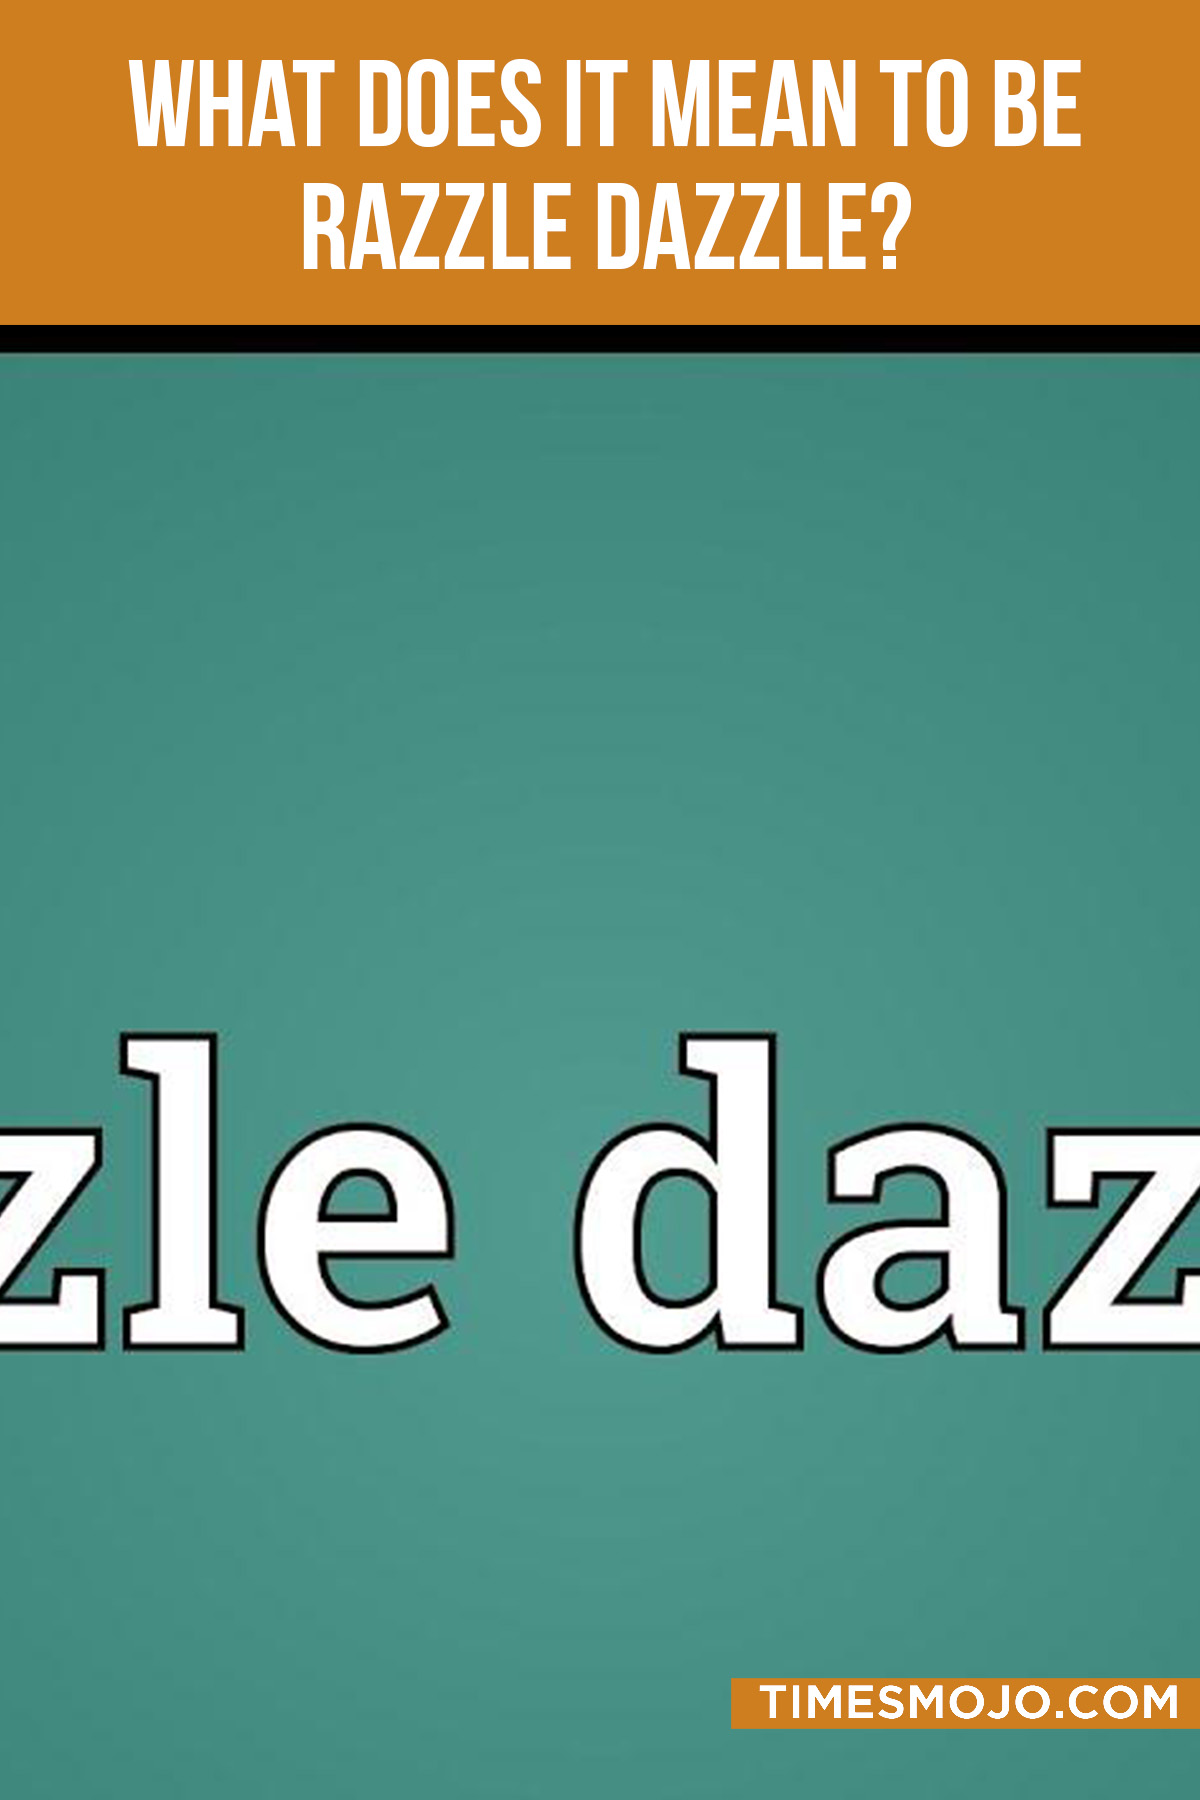 What Does It Mean To Be Razzle Dazzle